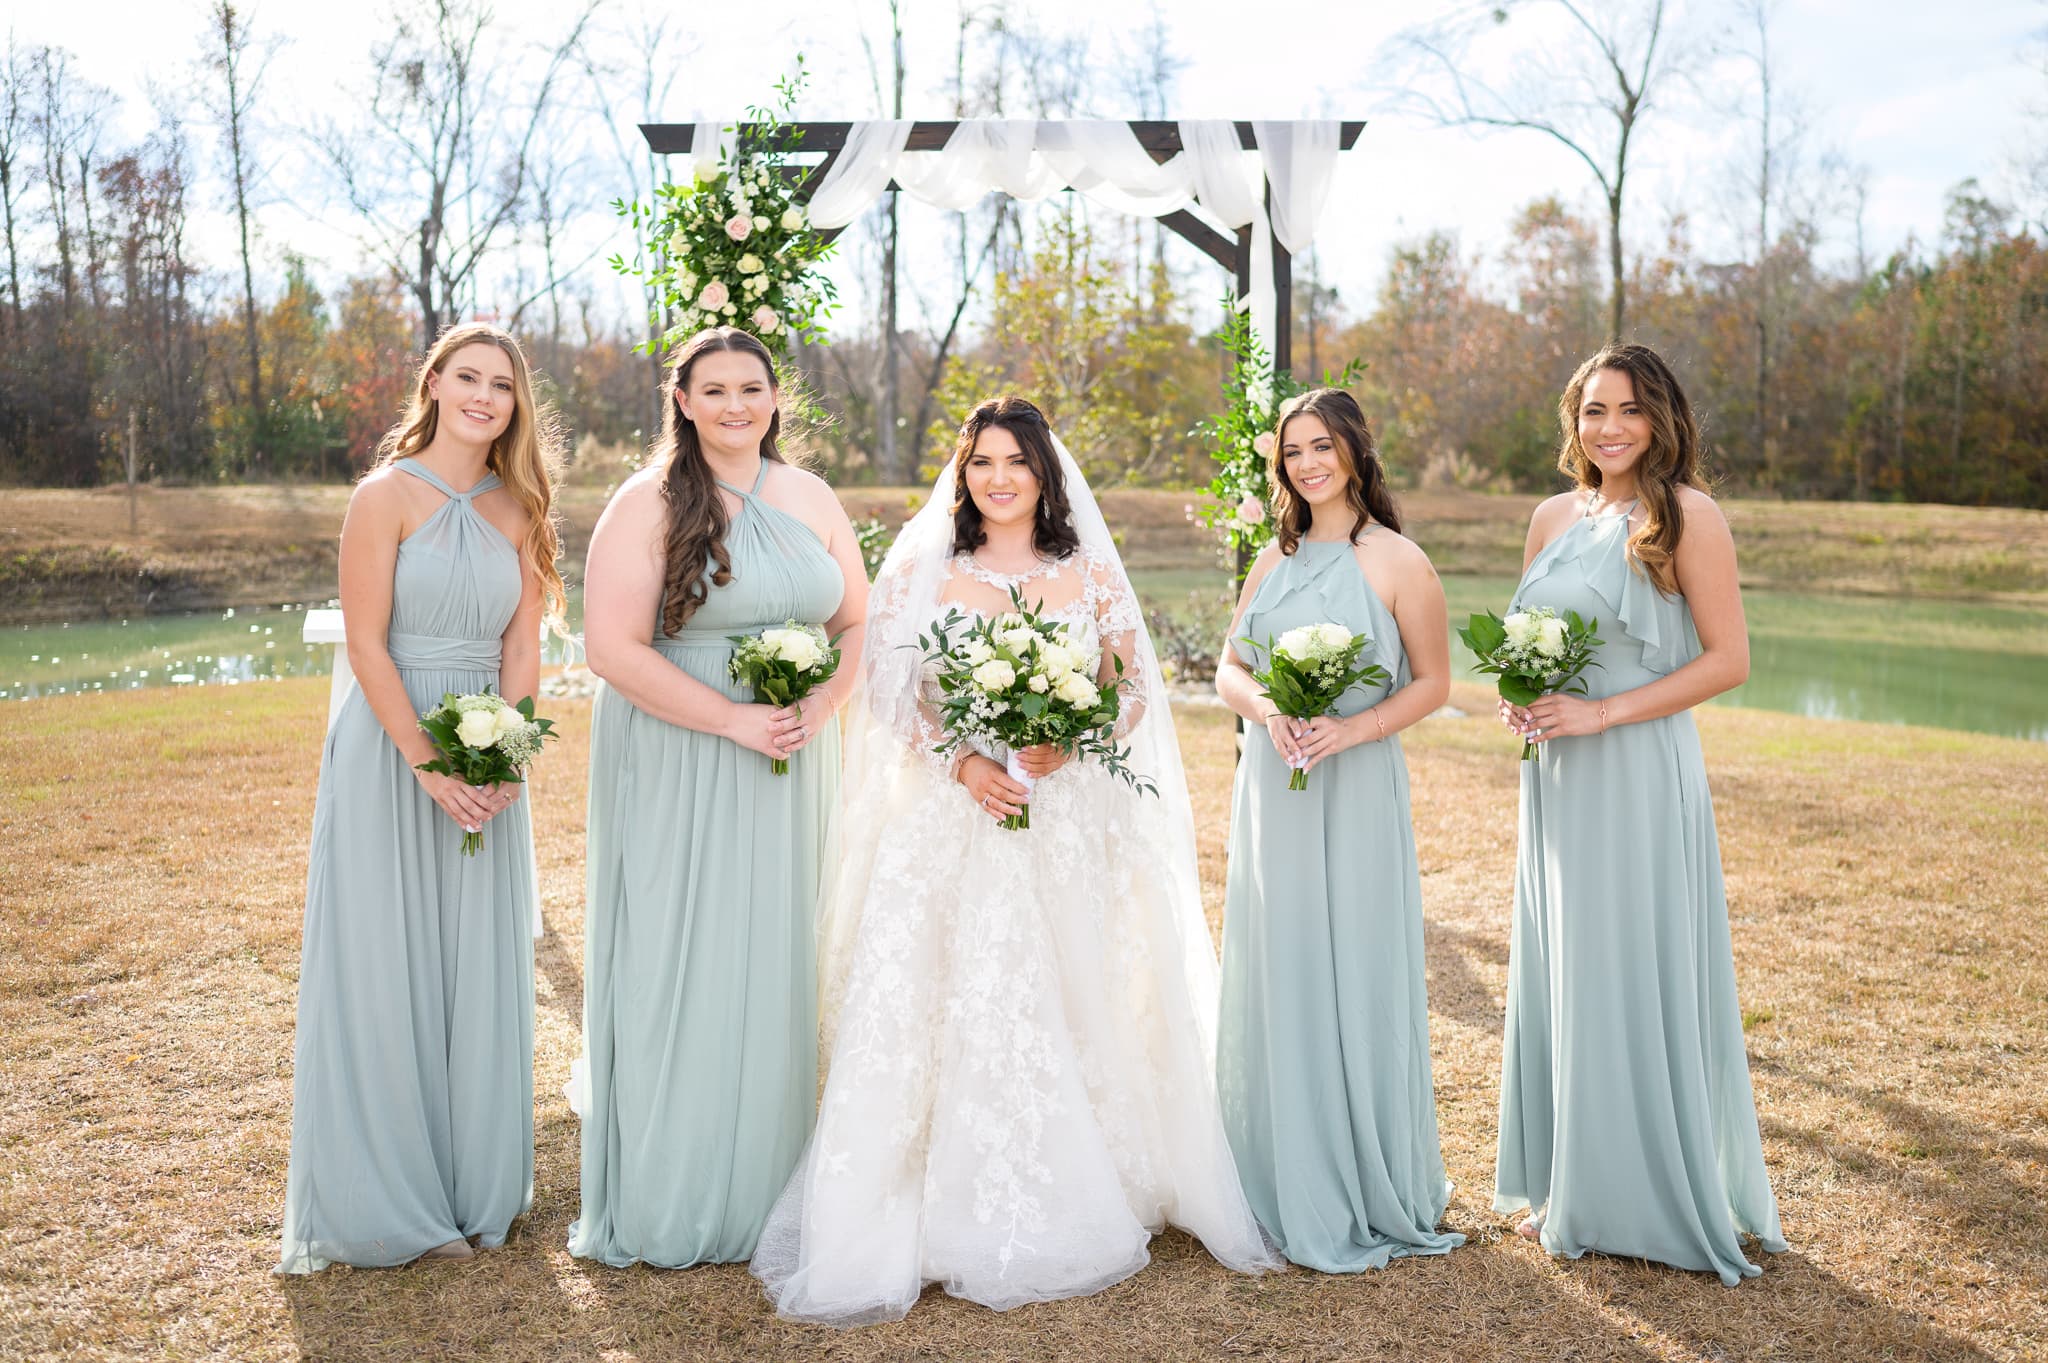 Bride with bridesmaids in front of wedding arch - The Venue at White Oaks Farm